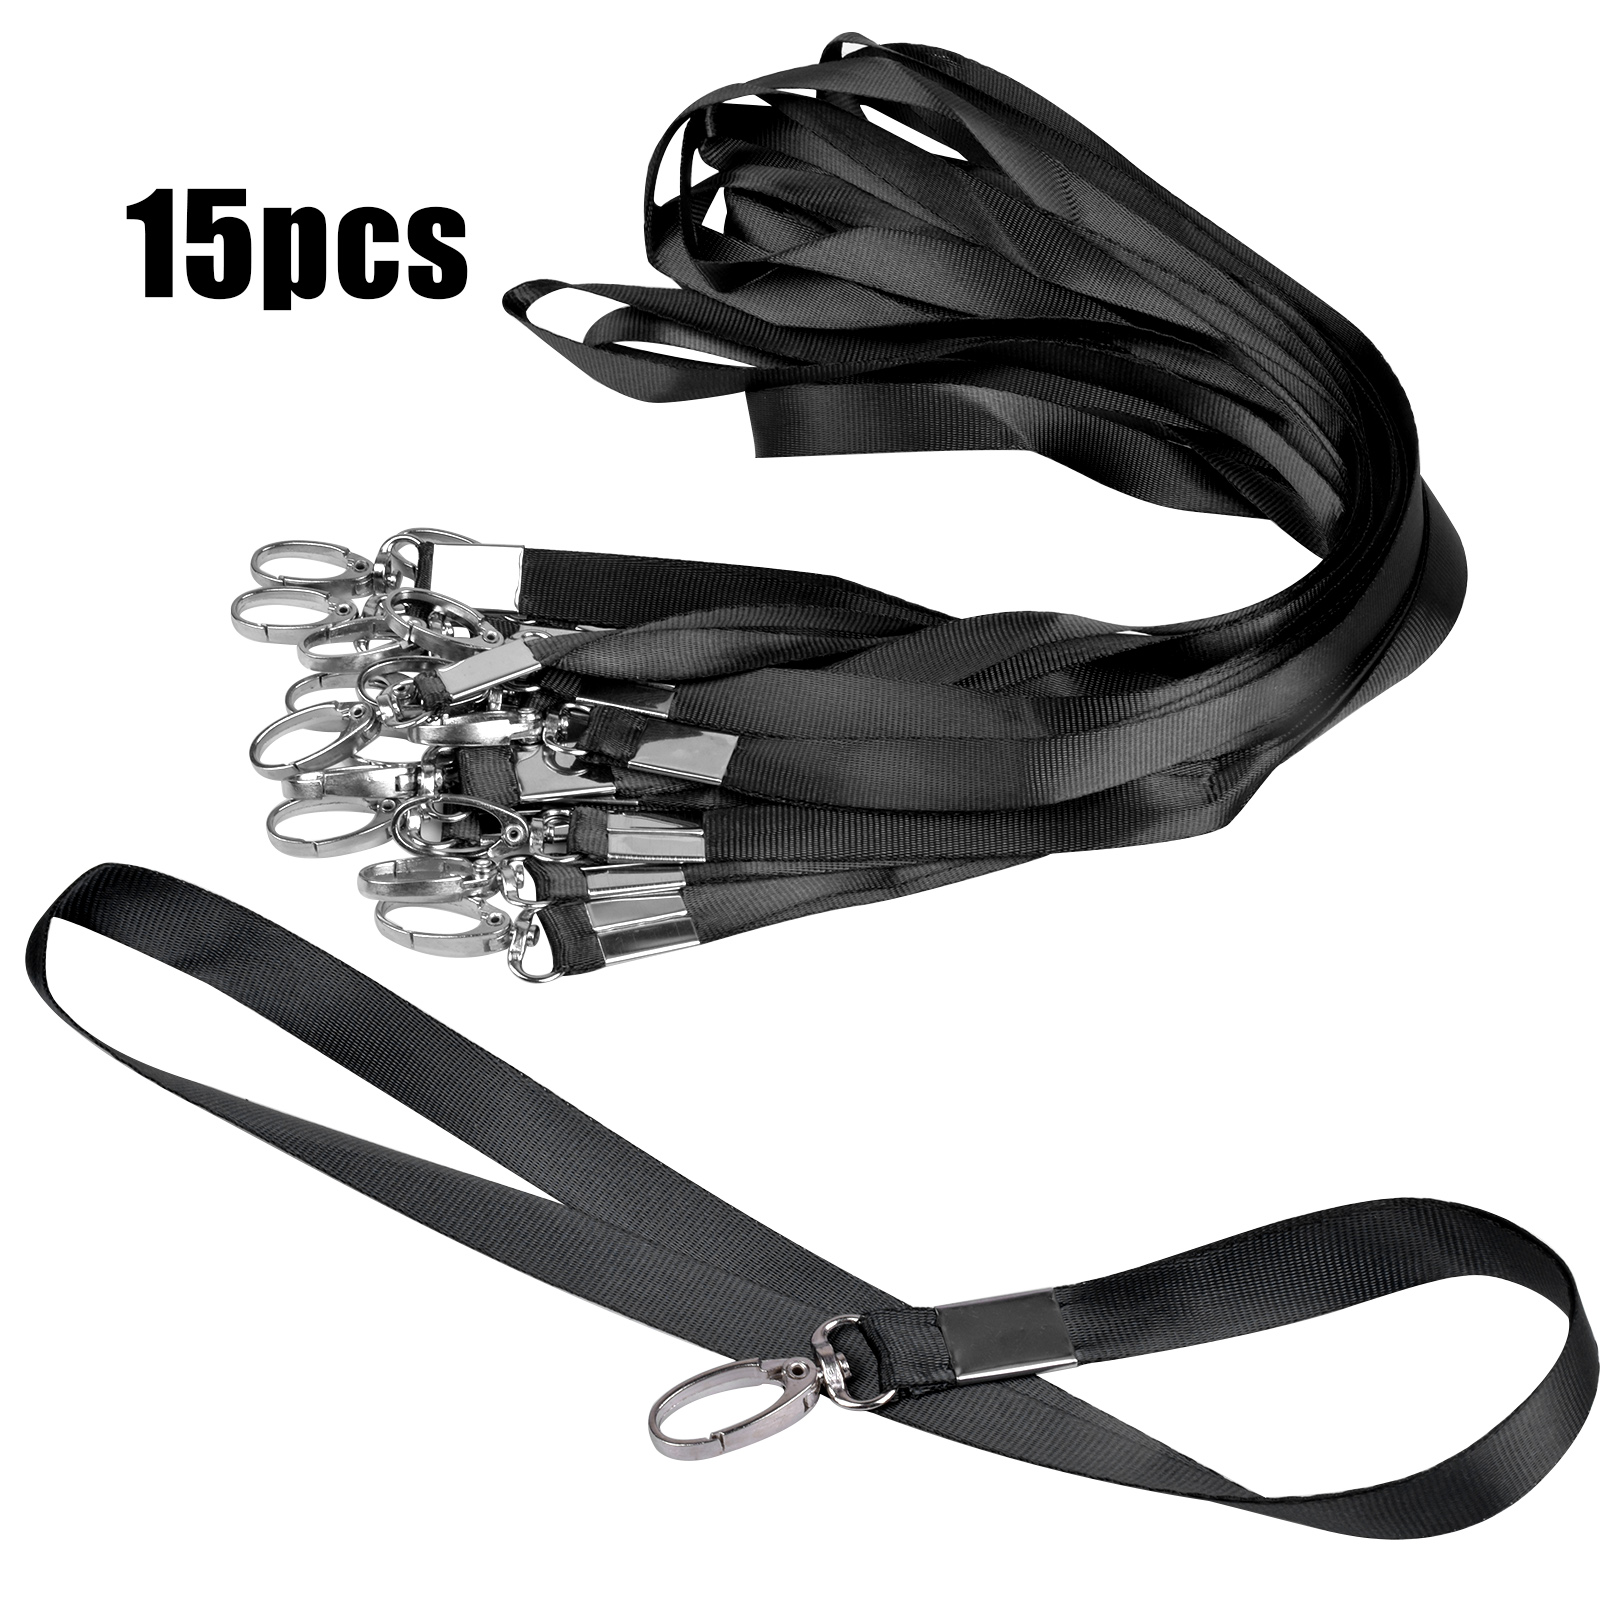 15pcs Lanyards for ID Badges Black Key Lanyard with Clip Neck Strap with Badge Clip Bulk Lanyards for Neck Name Badge H,Id Card Lanyard,Breakaway